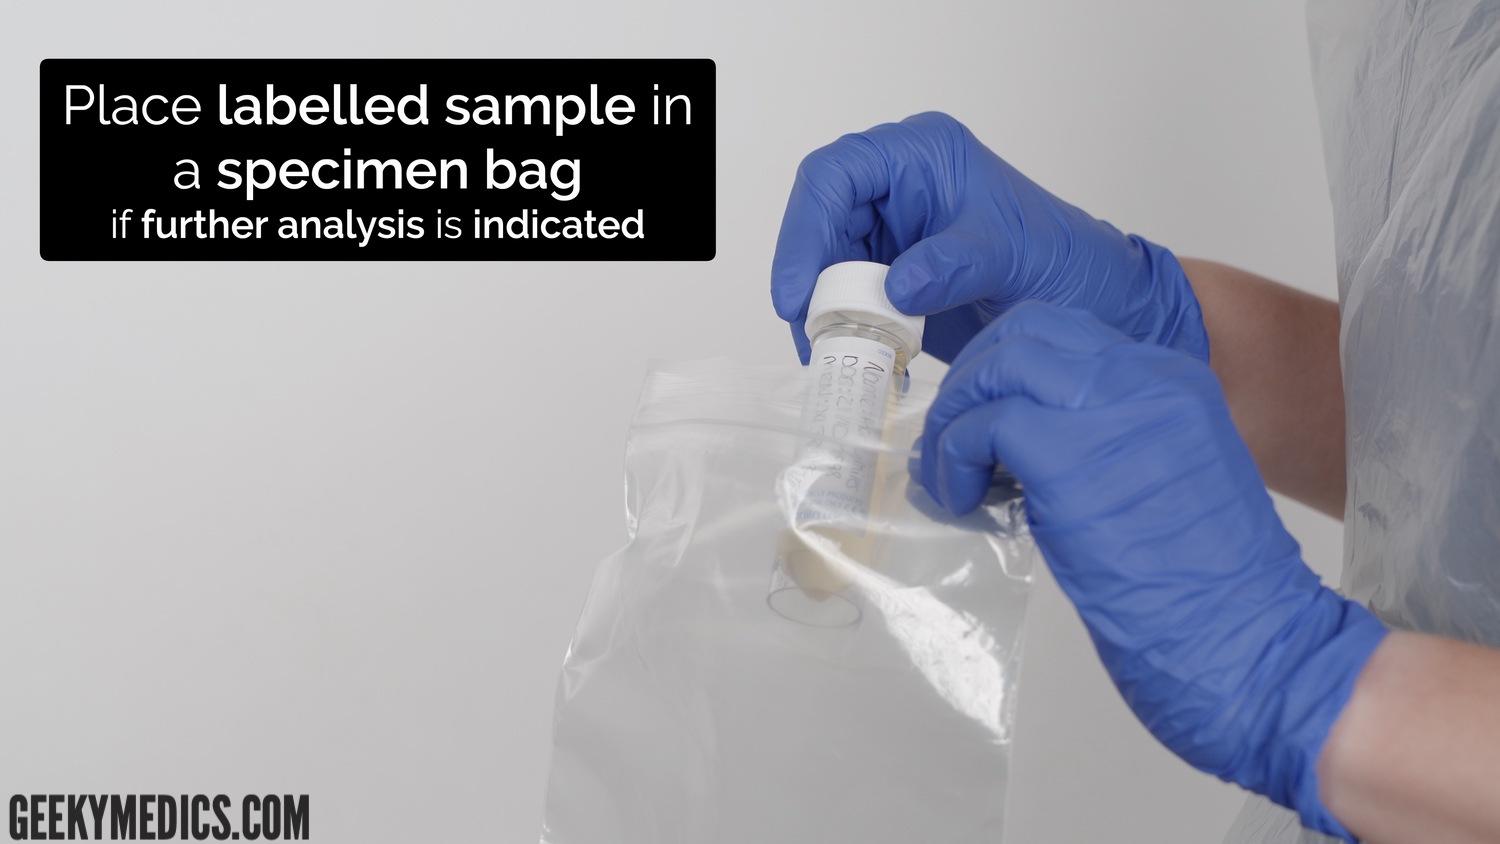 Urinalysis - place sample in specimen bag if required